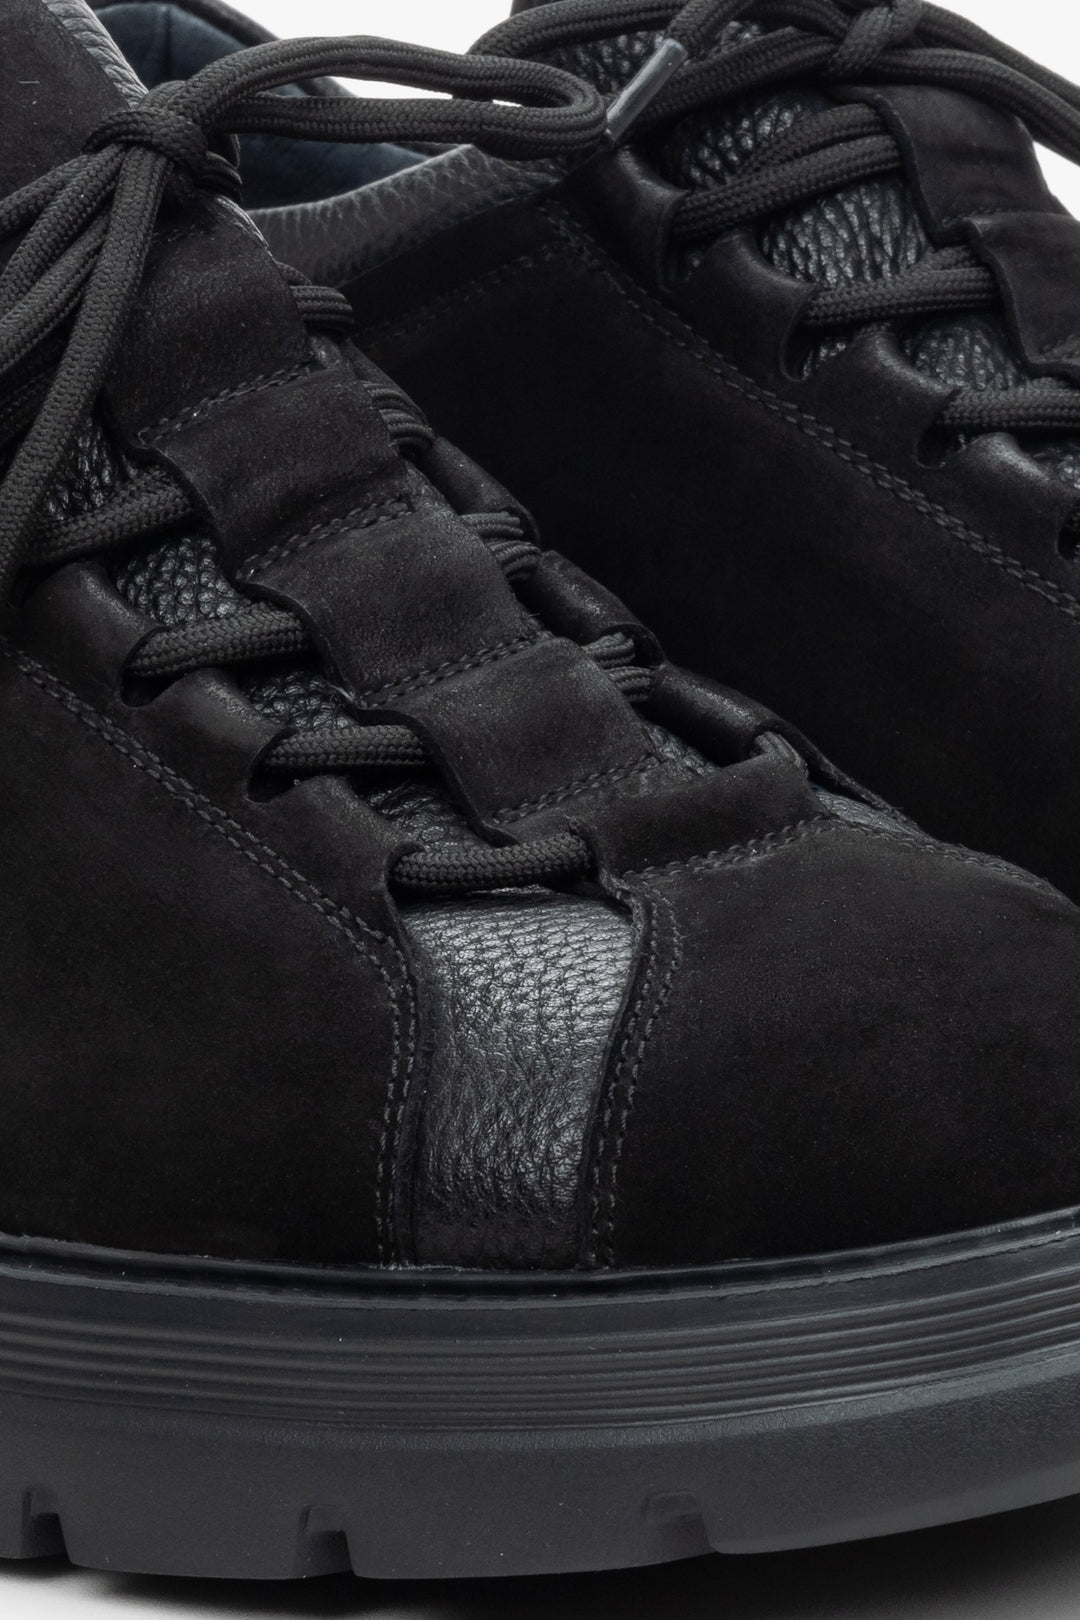 Men's black lace-up sneakers made of nubuck and leather - close-up on details.